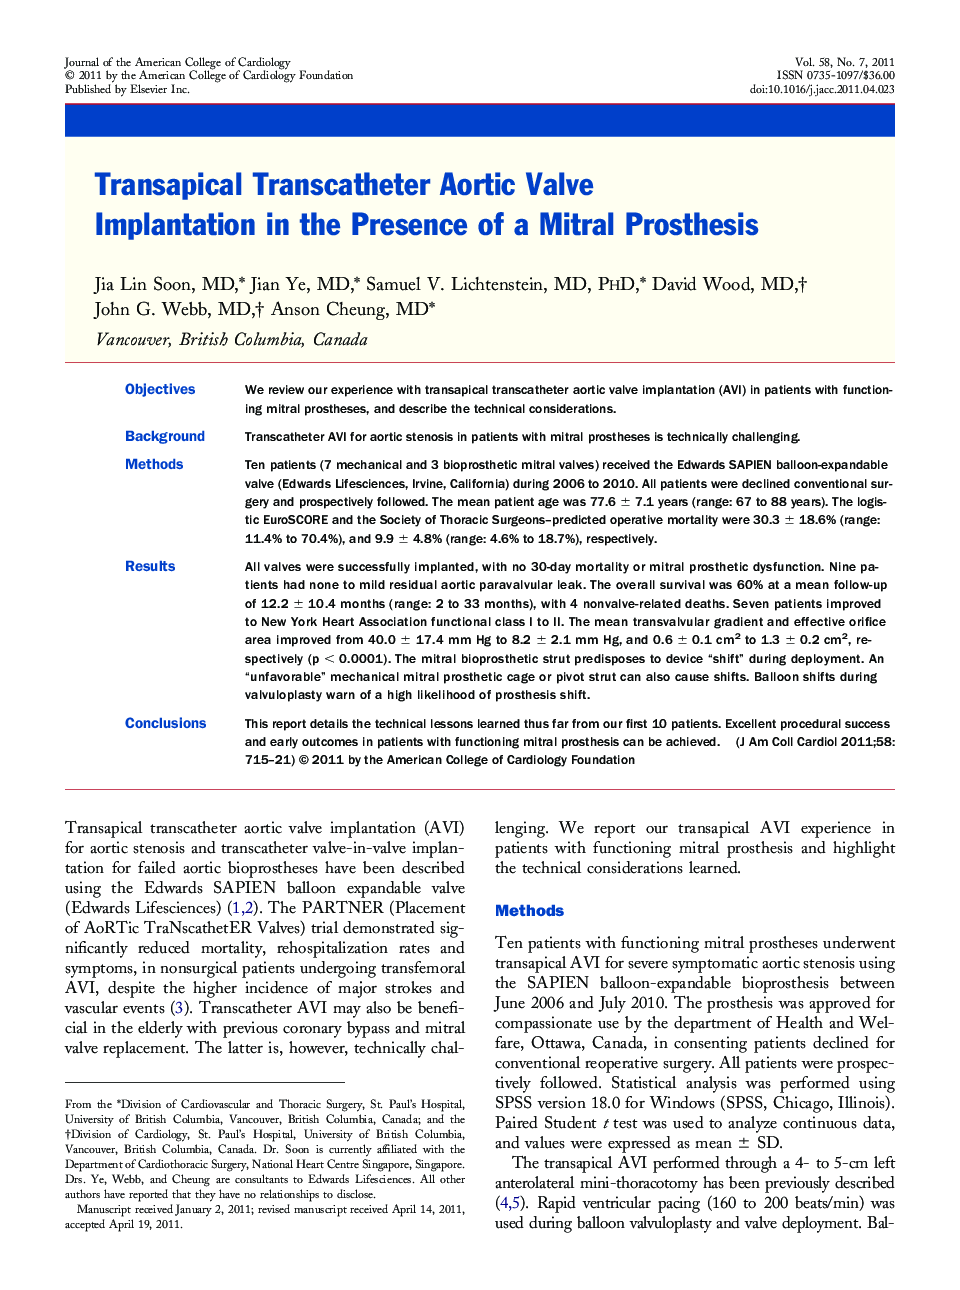 Transapical Transcatheter Aortic Valve Implantation in the Presence of a Mitral Prosthesis 